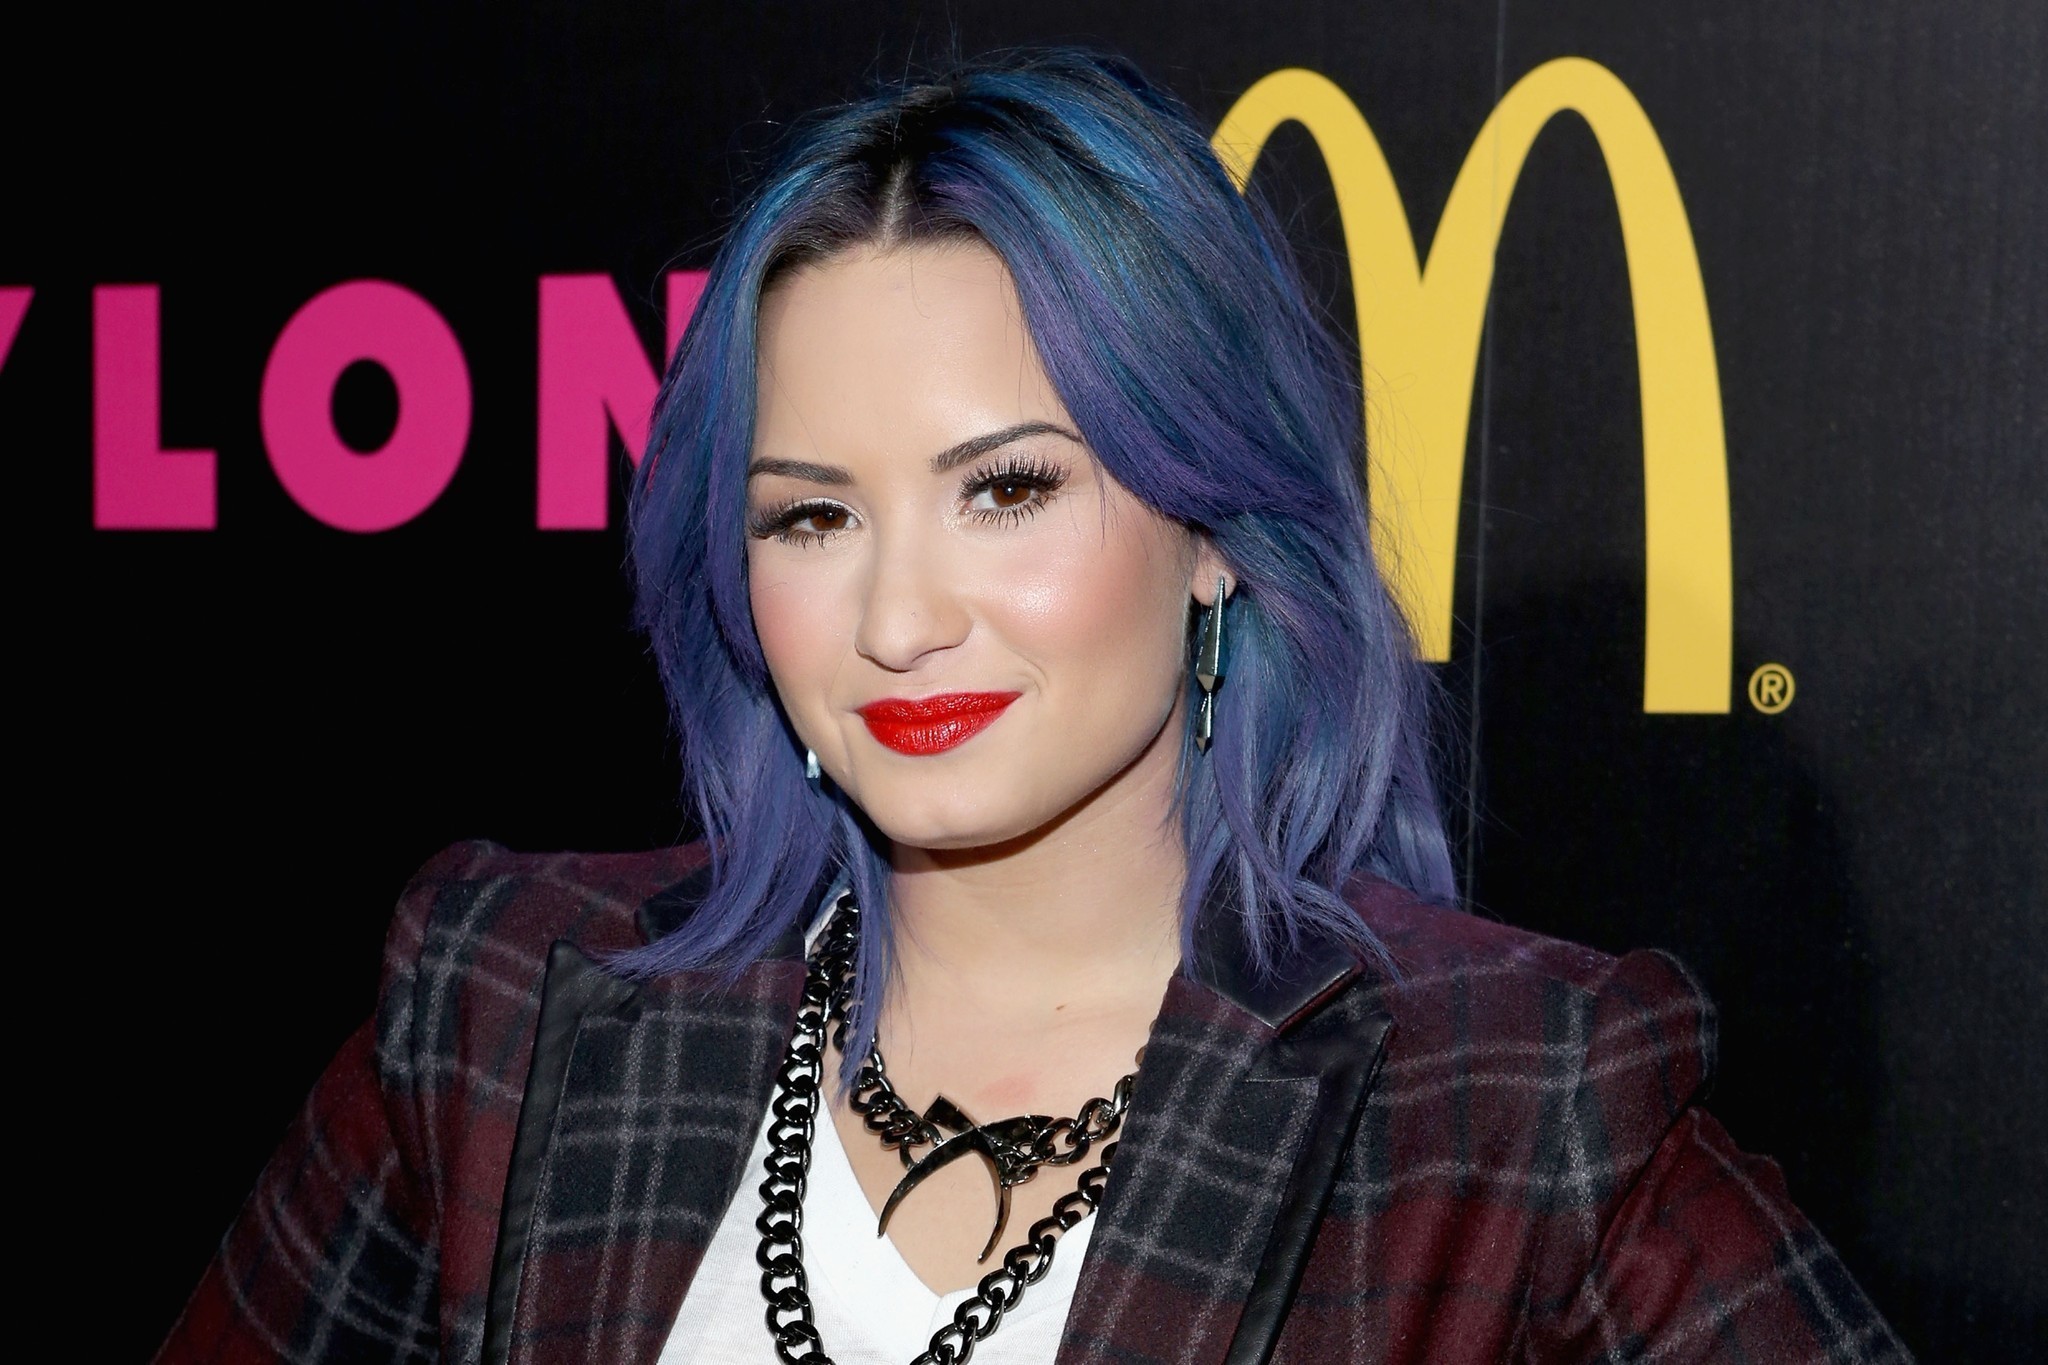 Demi Lovato opens up about heavy use of cocaine, alcohol - Chicago Tribune2048 x 1365